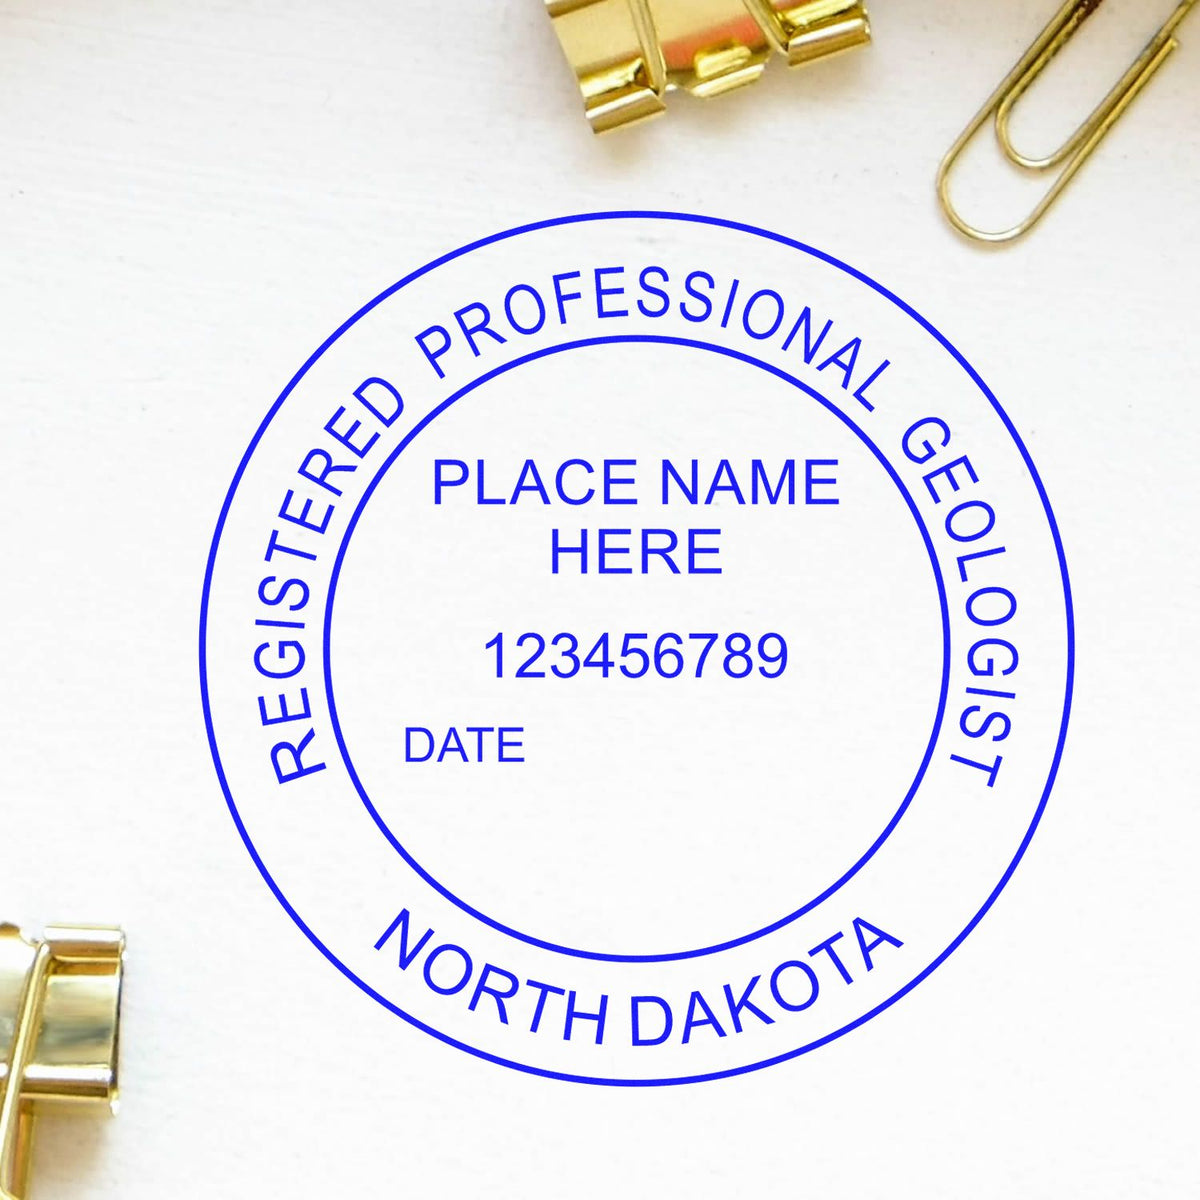 An alternative view of the Self-Inking North Dakota Geologist Stamp stamped on a sheet of paper showing the image in use